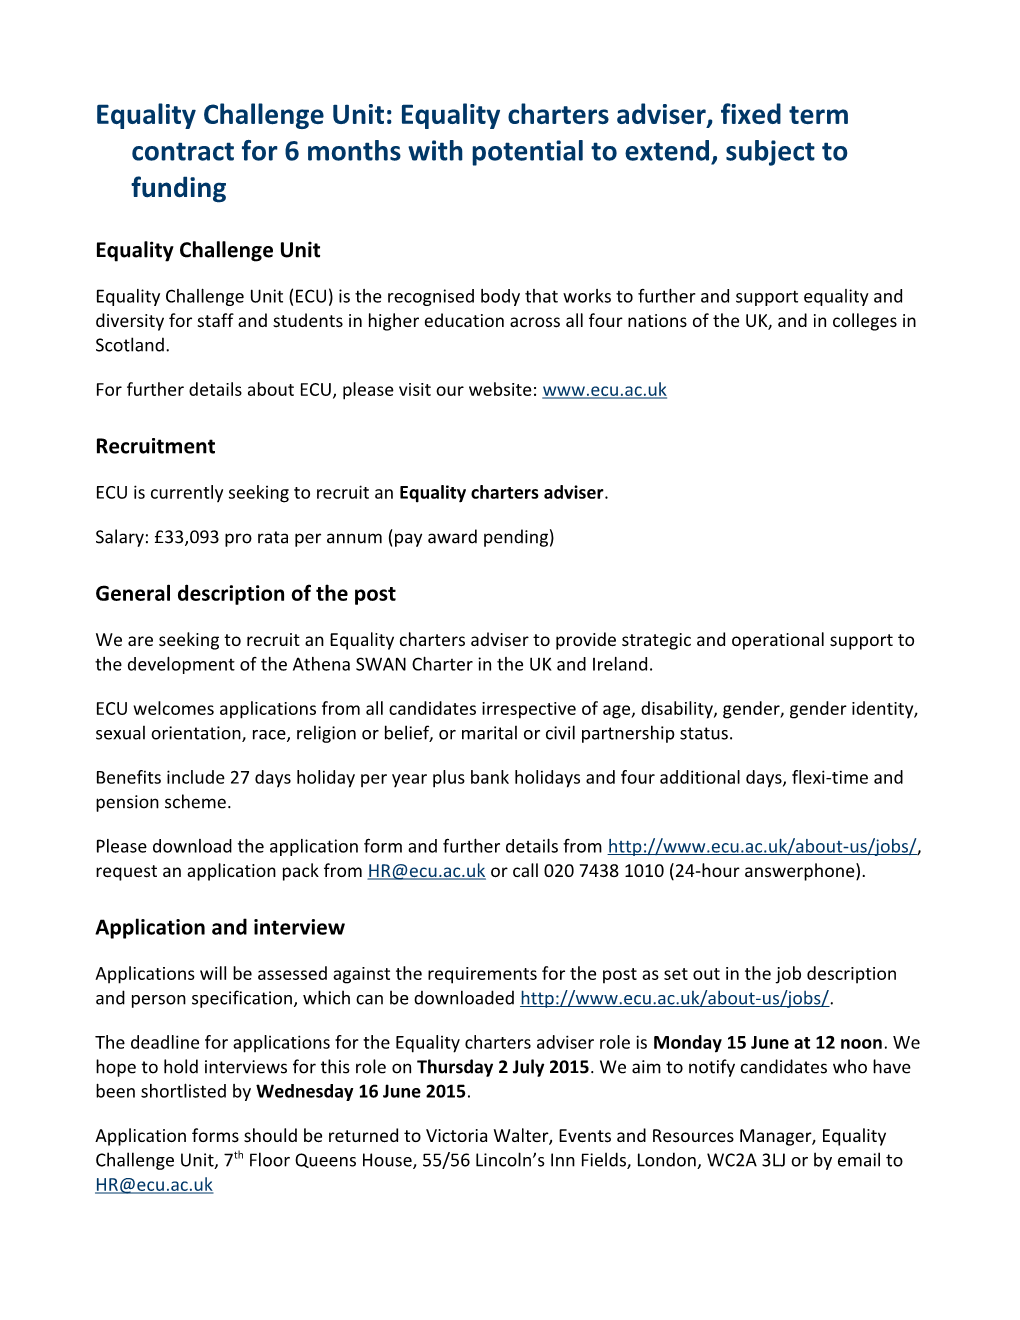 Equality Challenge Unit: Equality Charters Adviser, Fixed Term Contract for 6 Months With